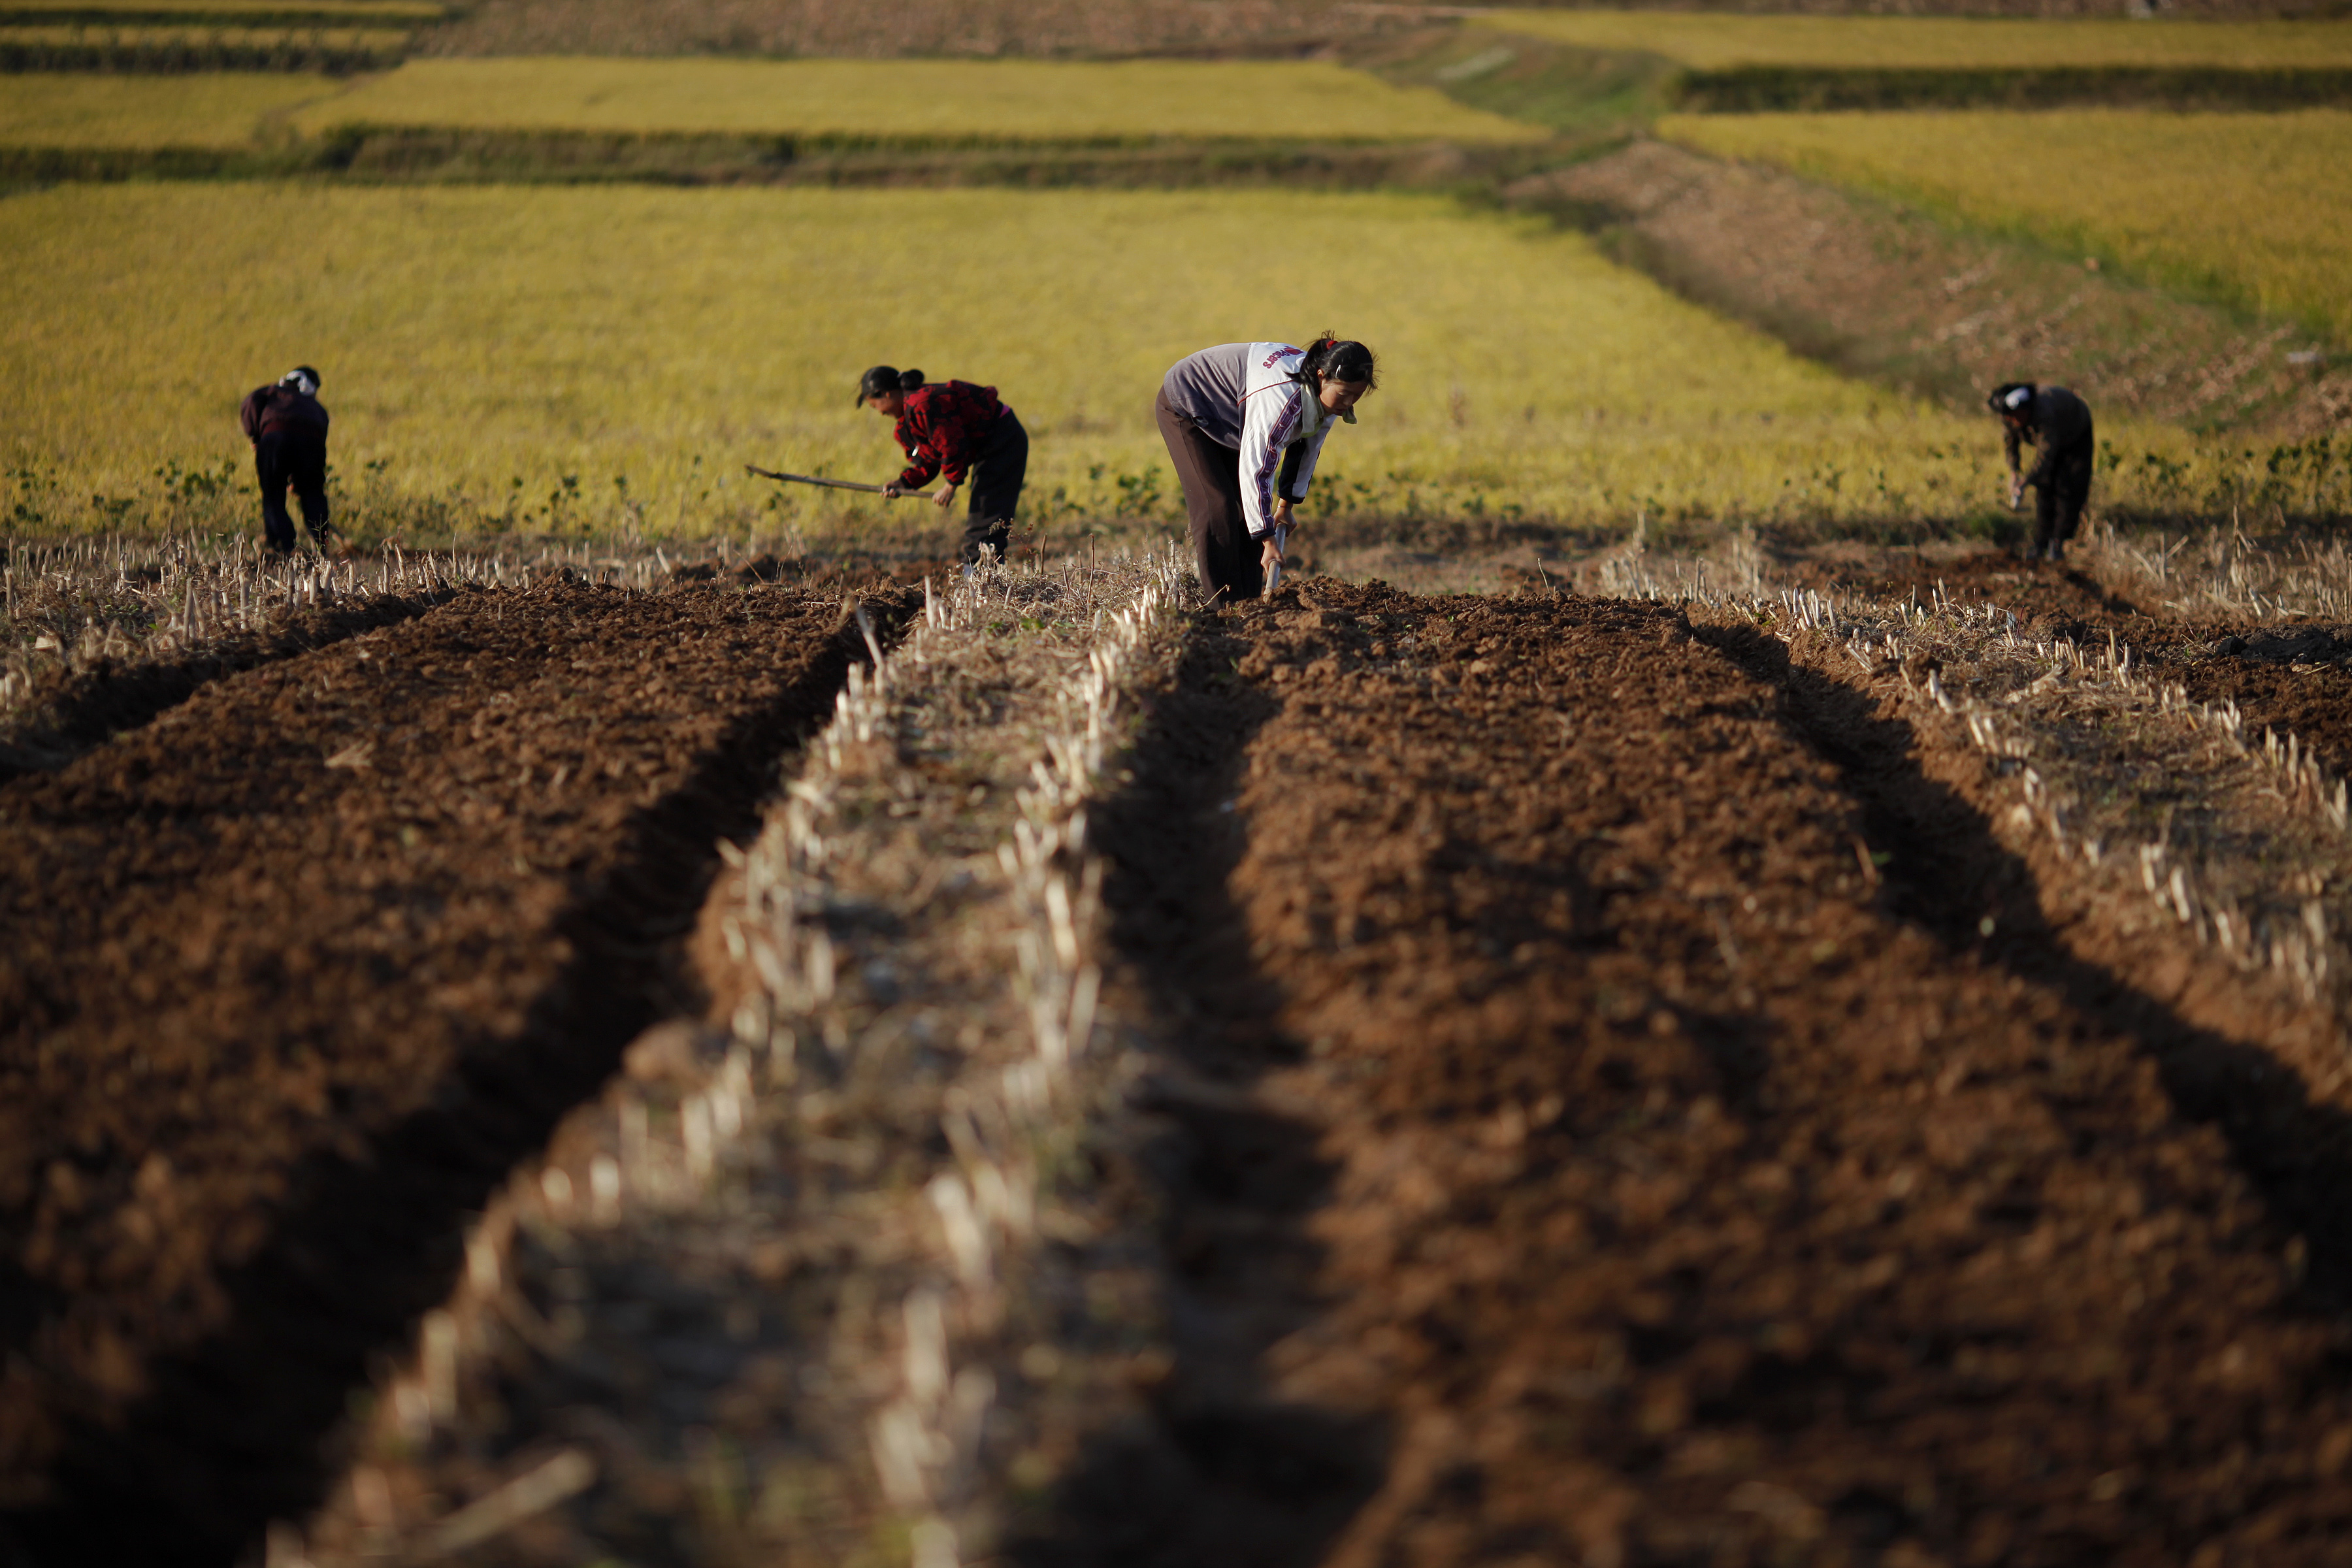 North Korean farmers work in a field of a collective farm in the South Hwanghae province